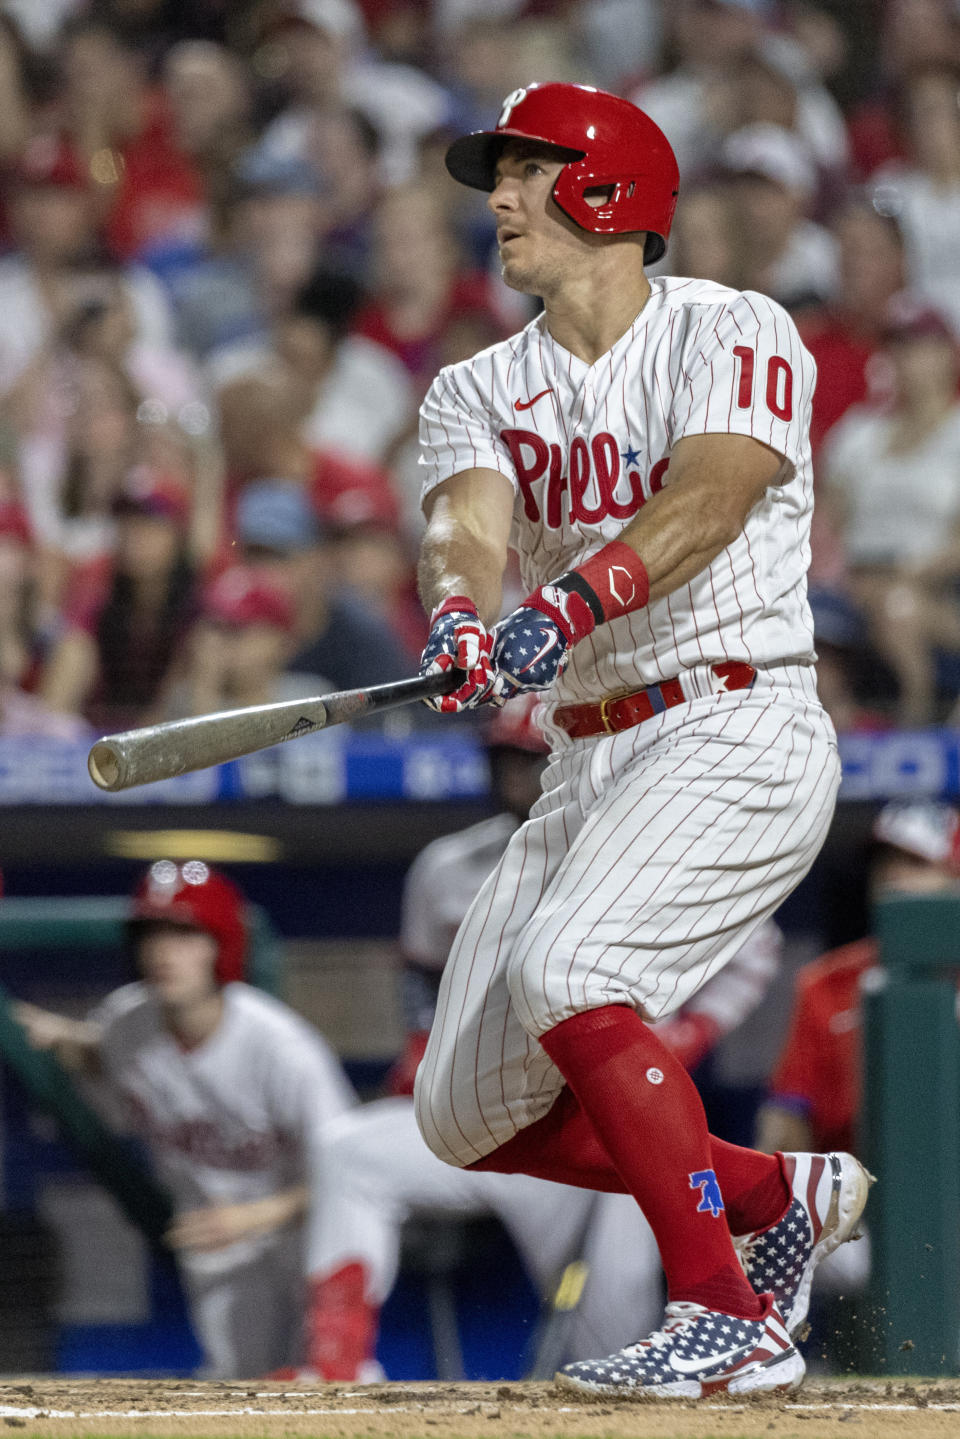 Philadelphia Phillies' J.T. Realmuto watches his two-run home run during the sixth inning of a baseball game against the St. Louis Cardinals, Sunday, July 3, 2022, in Philadelphia. (AP Photo/Laurence Kesterson)